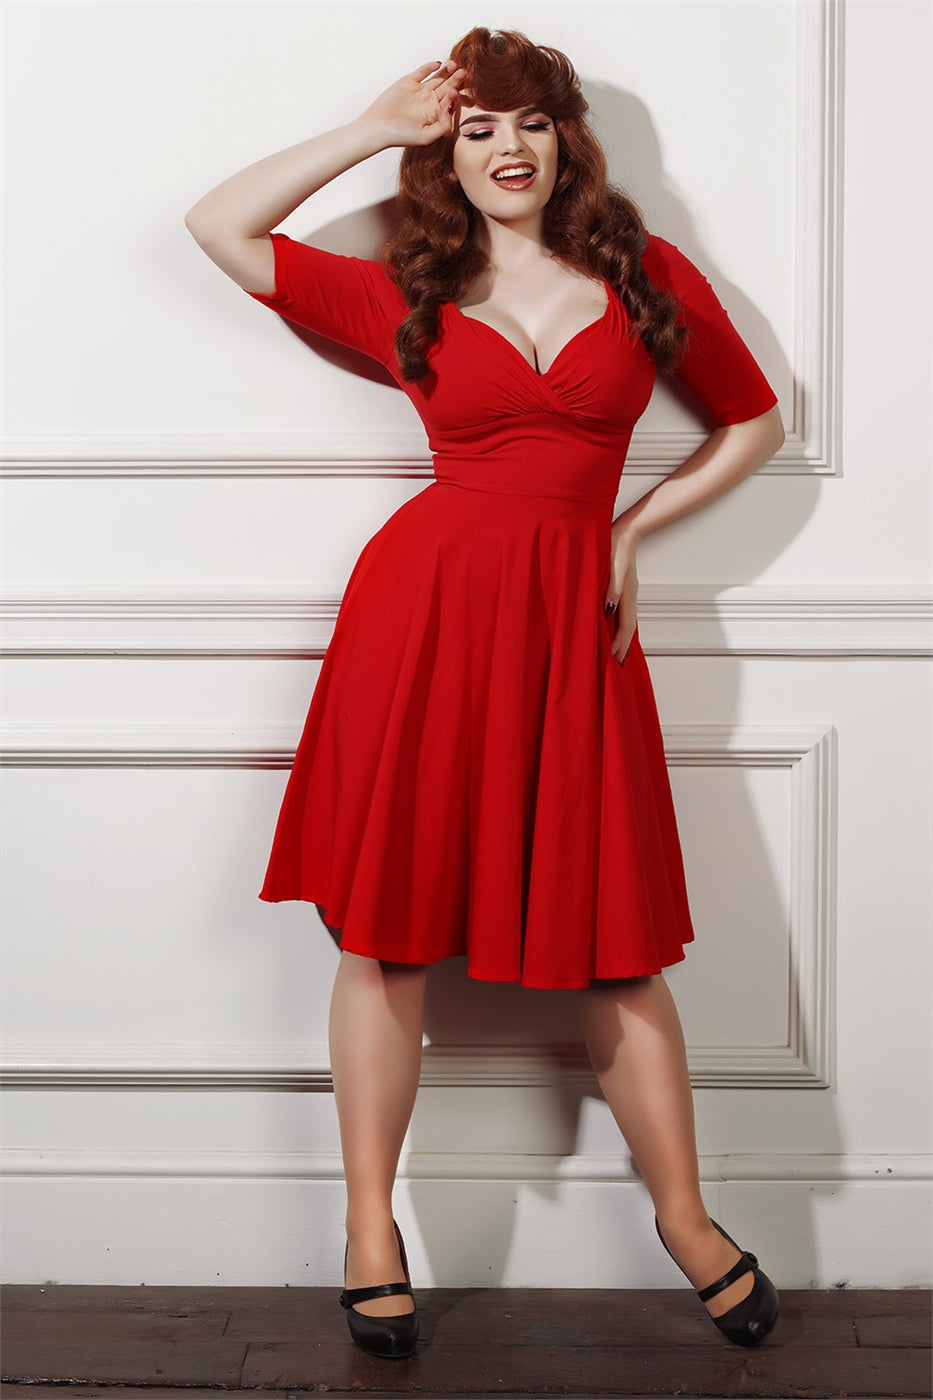 fair skinned model smiling with her hand up to her forehead and long curly auburn hair wearing a red swing dress standing in front of a white wooden panelled wall.